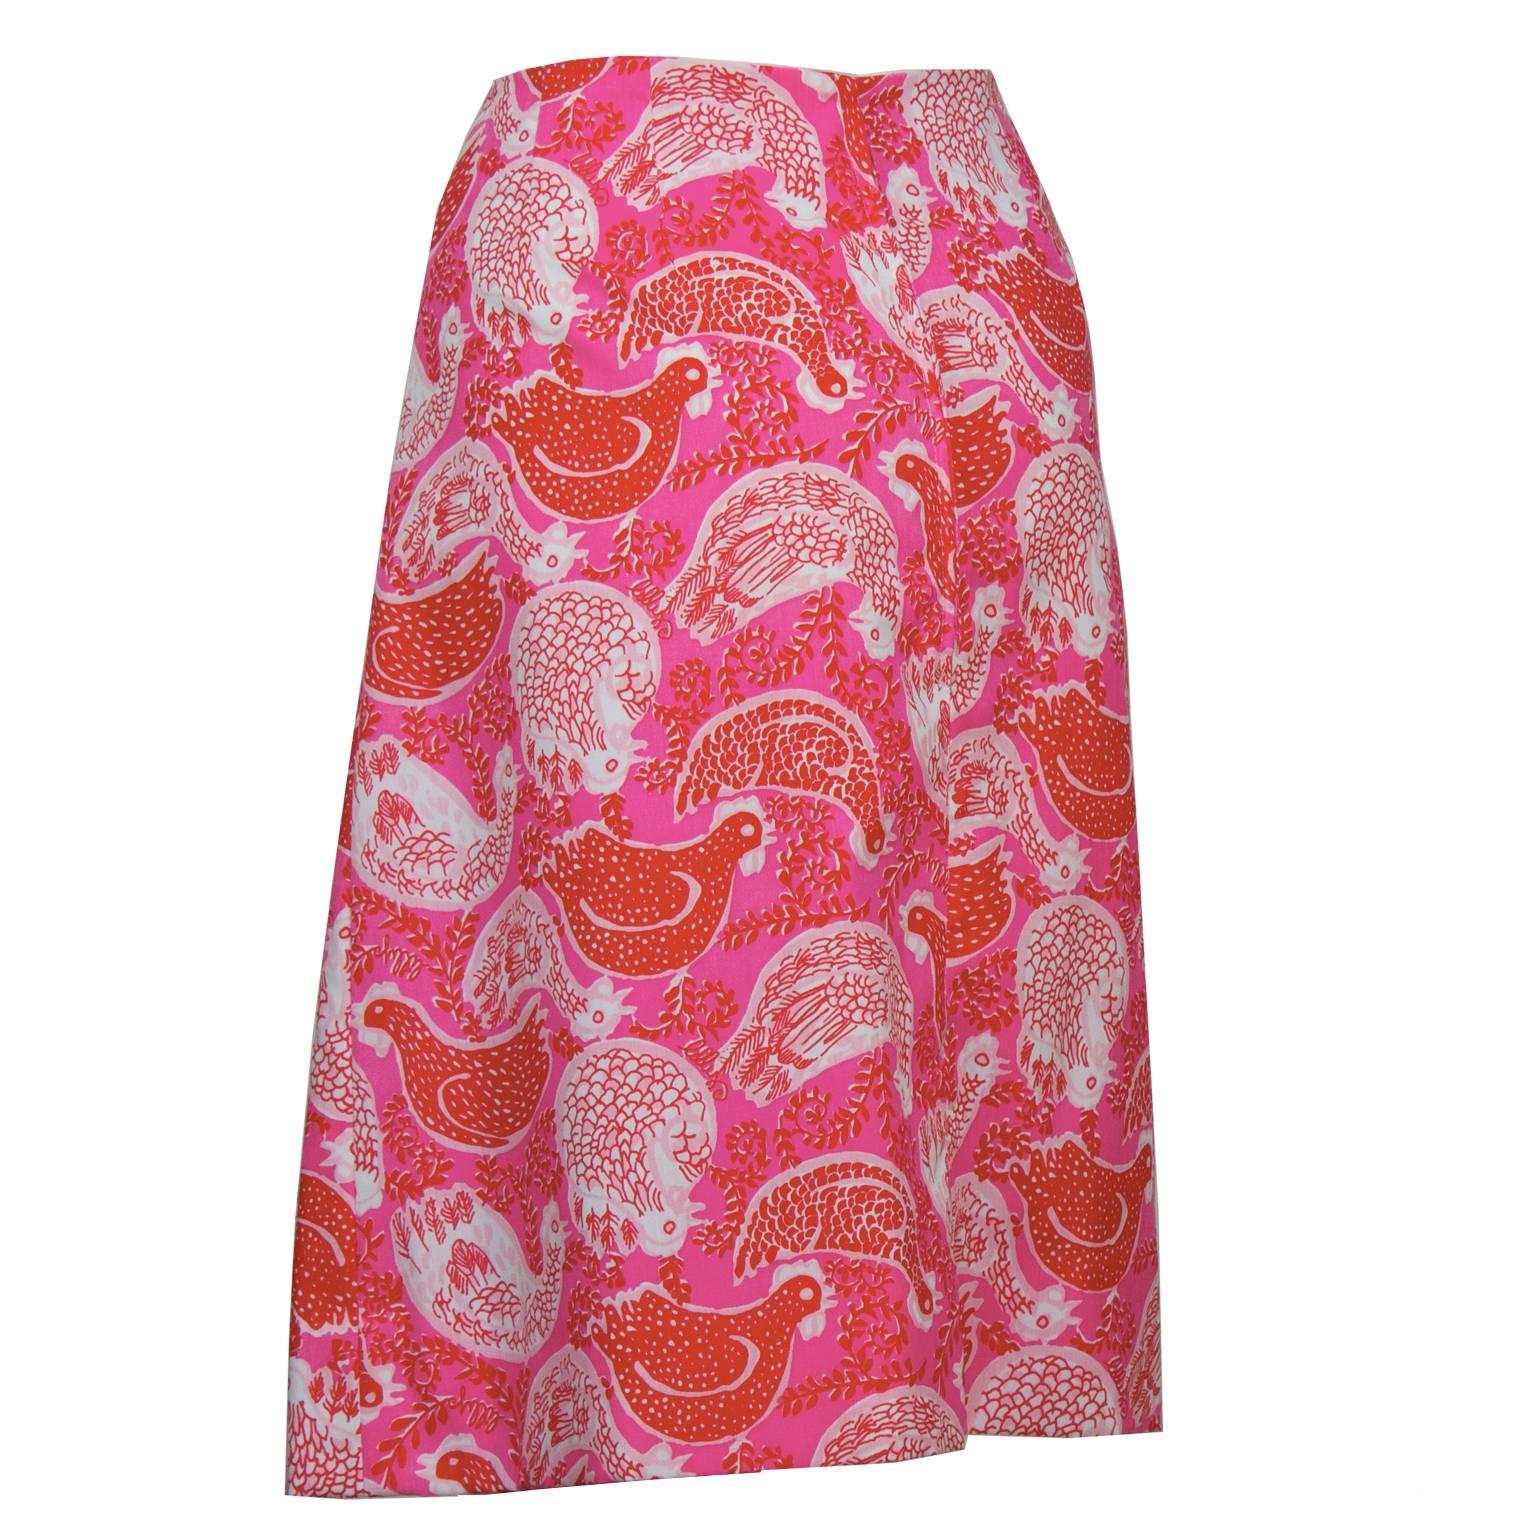 lilly pulitzer pink skirt